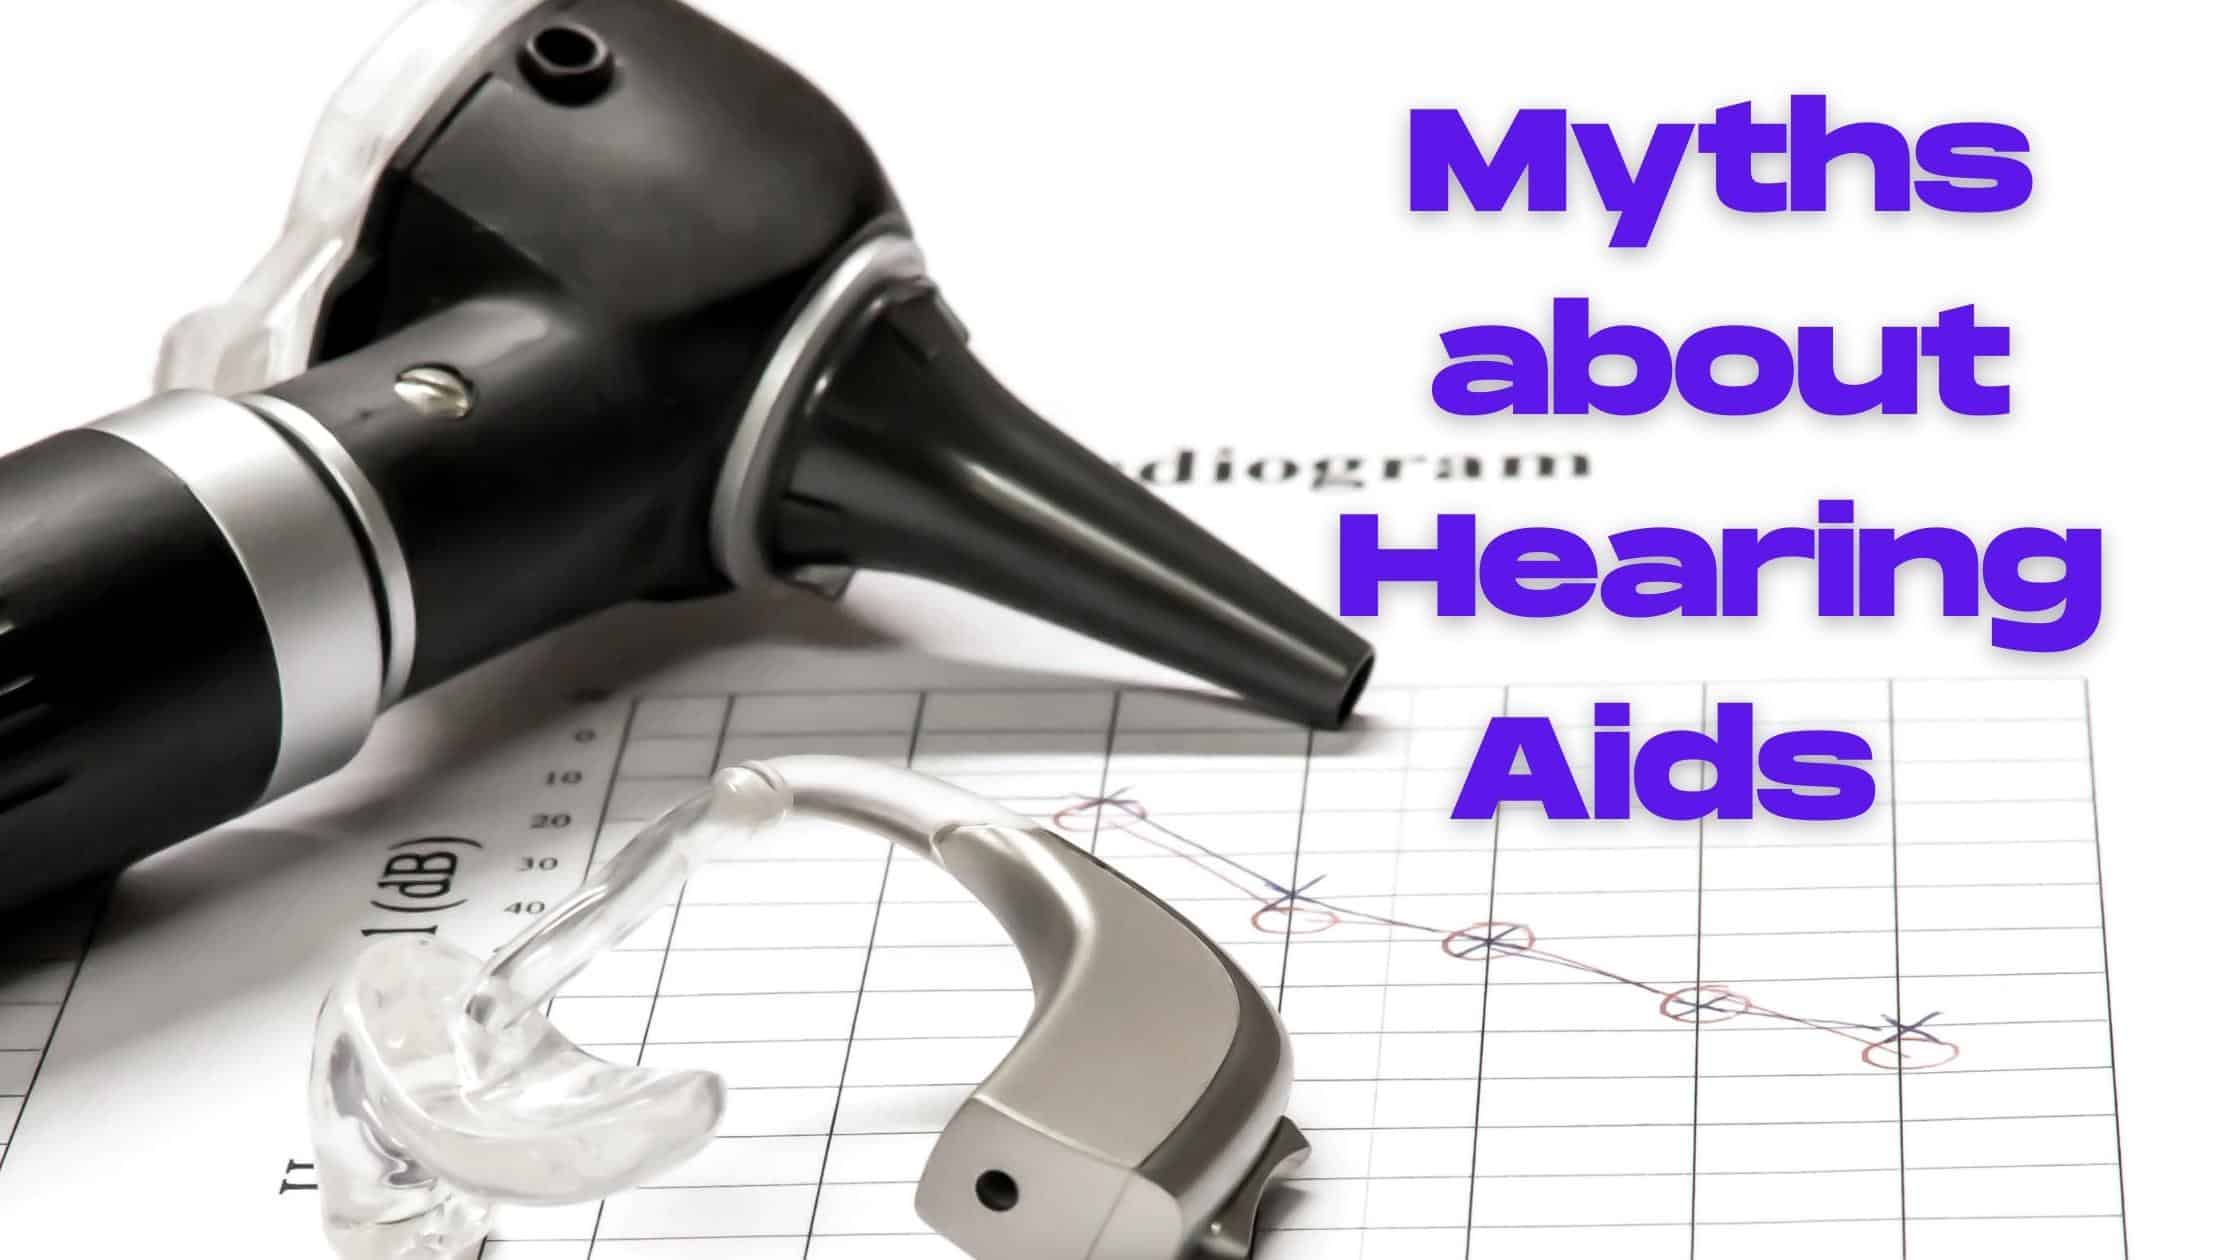 myths about hearing aids